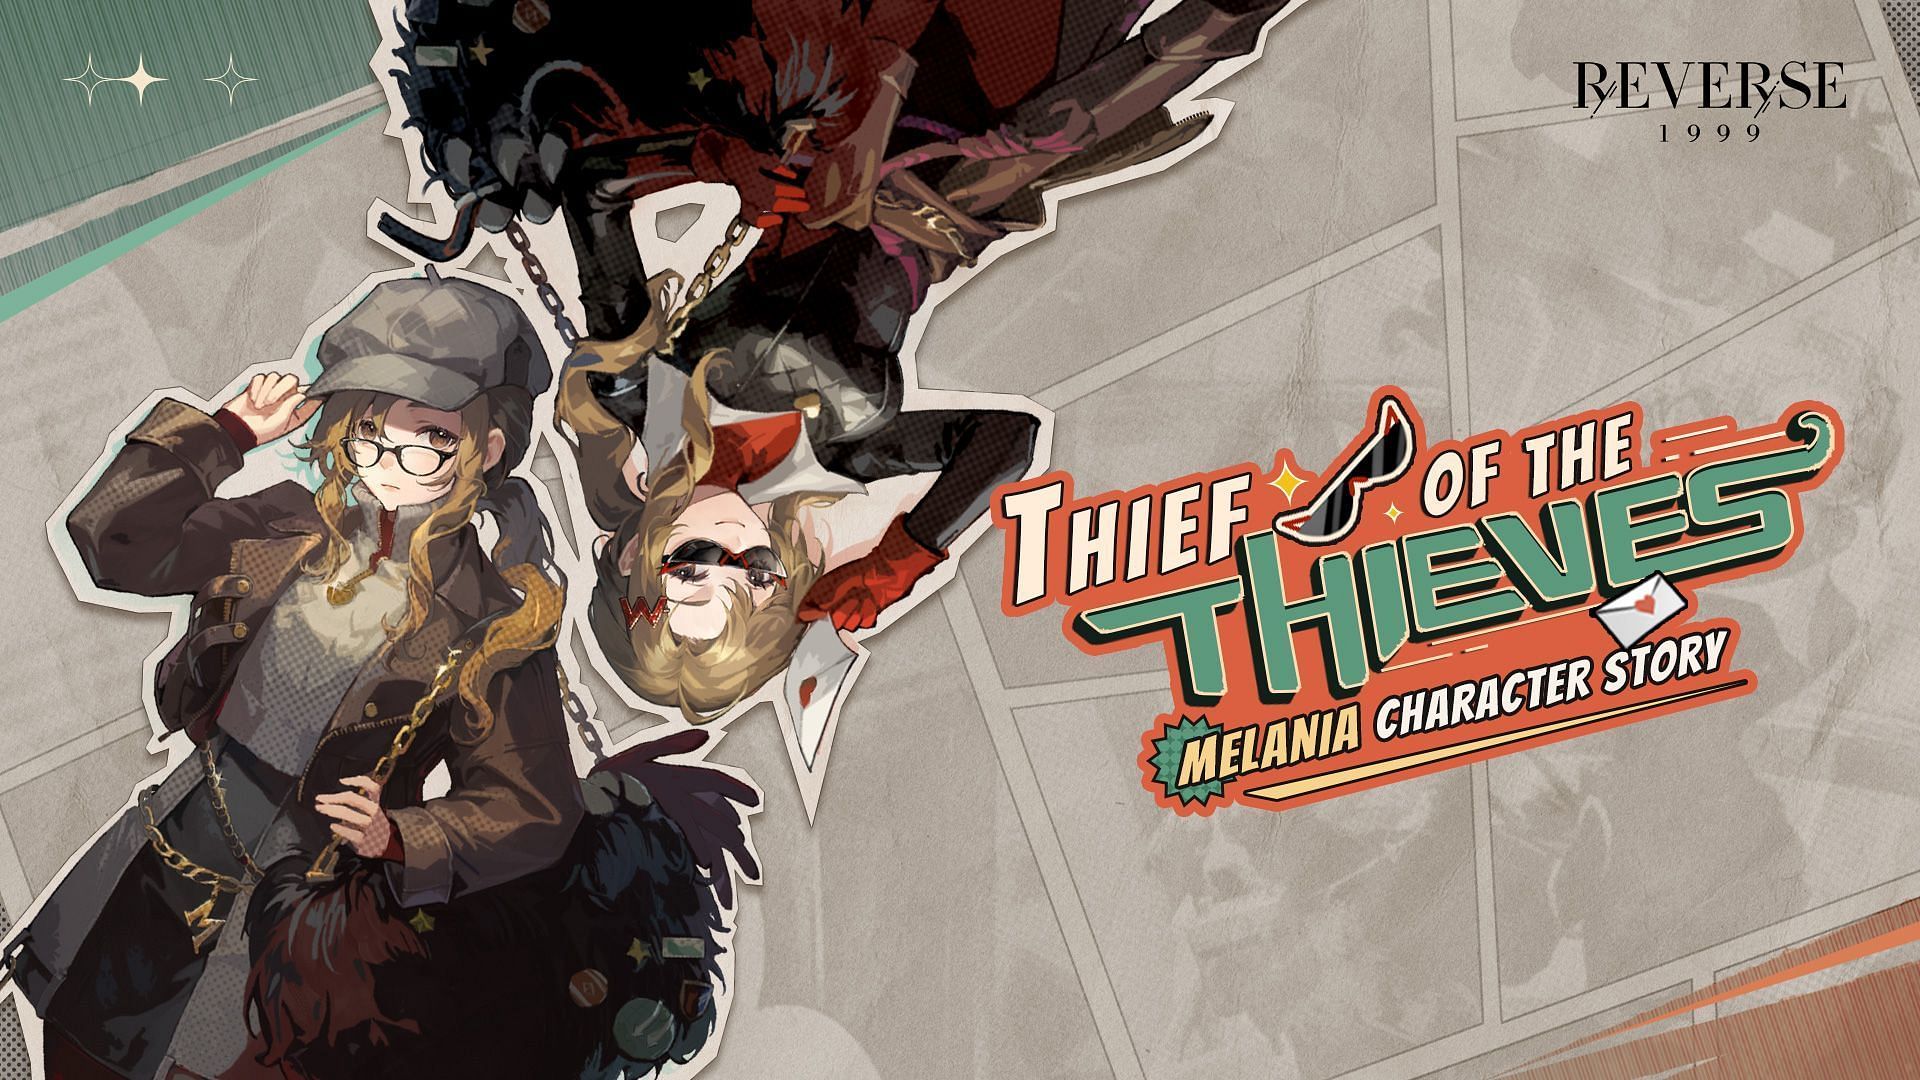 Thief of the Thieves side event will be available from November 9 to 23 in the Reverse 1999 1.1 update (Image via Bluepoch)